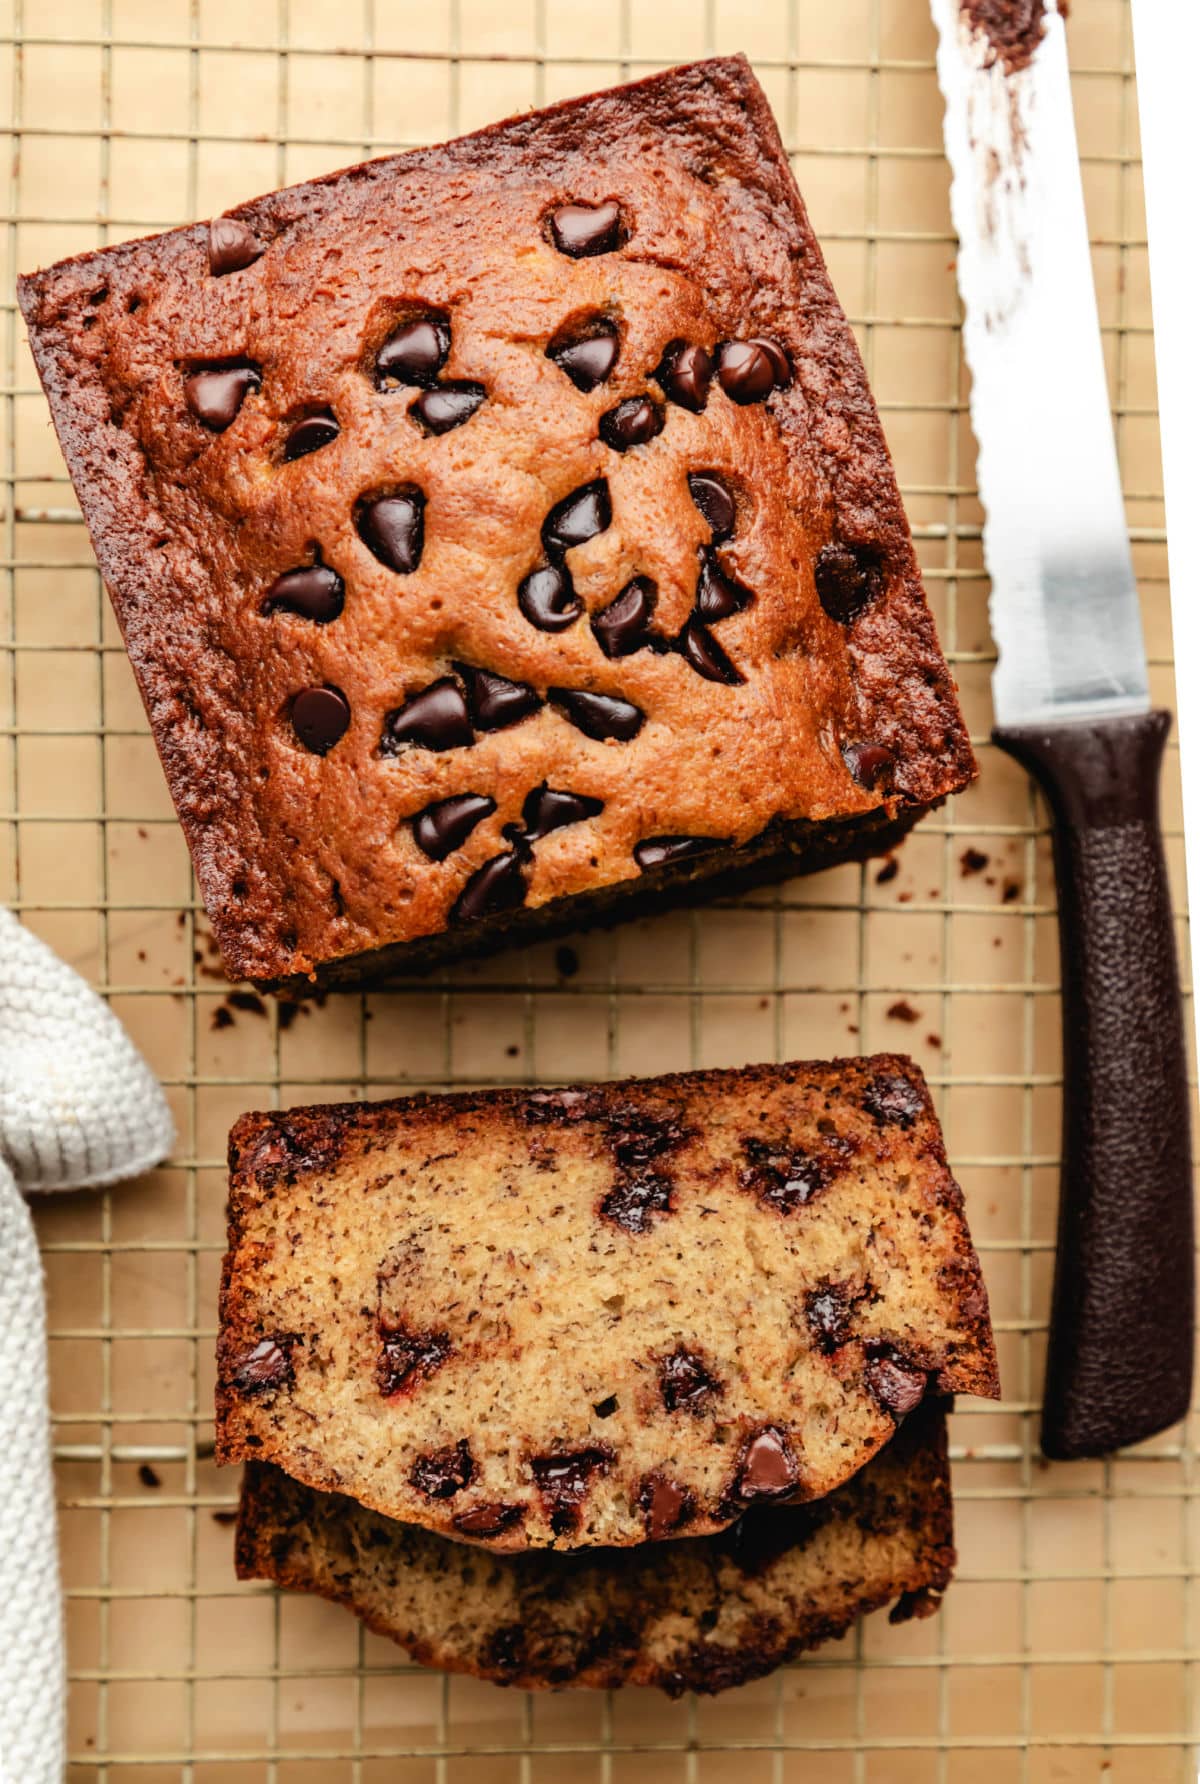 Two sliced pieces of chocolate chip banana bread next to the loaf. 